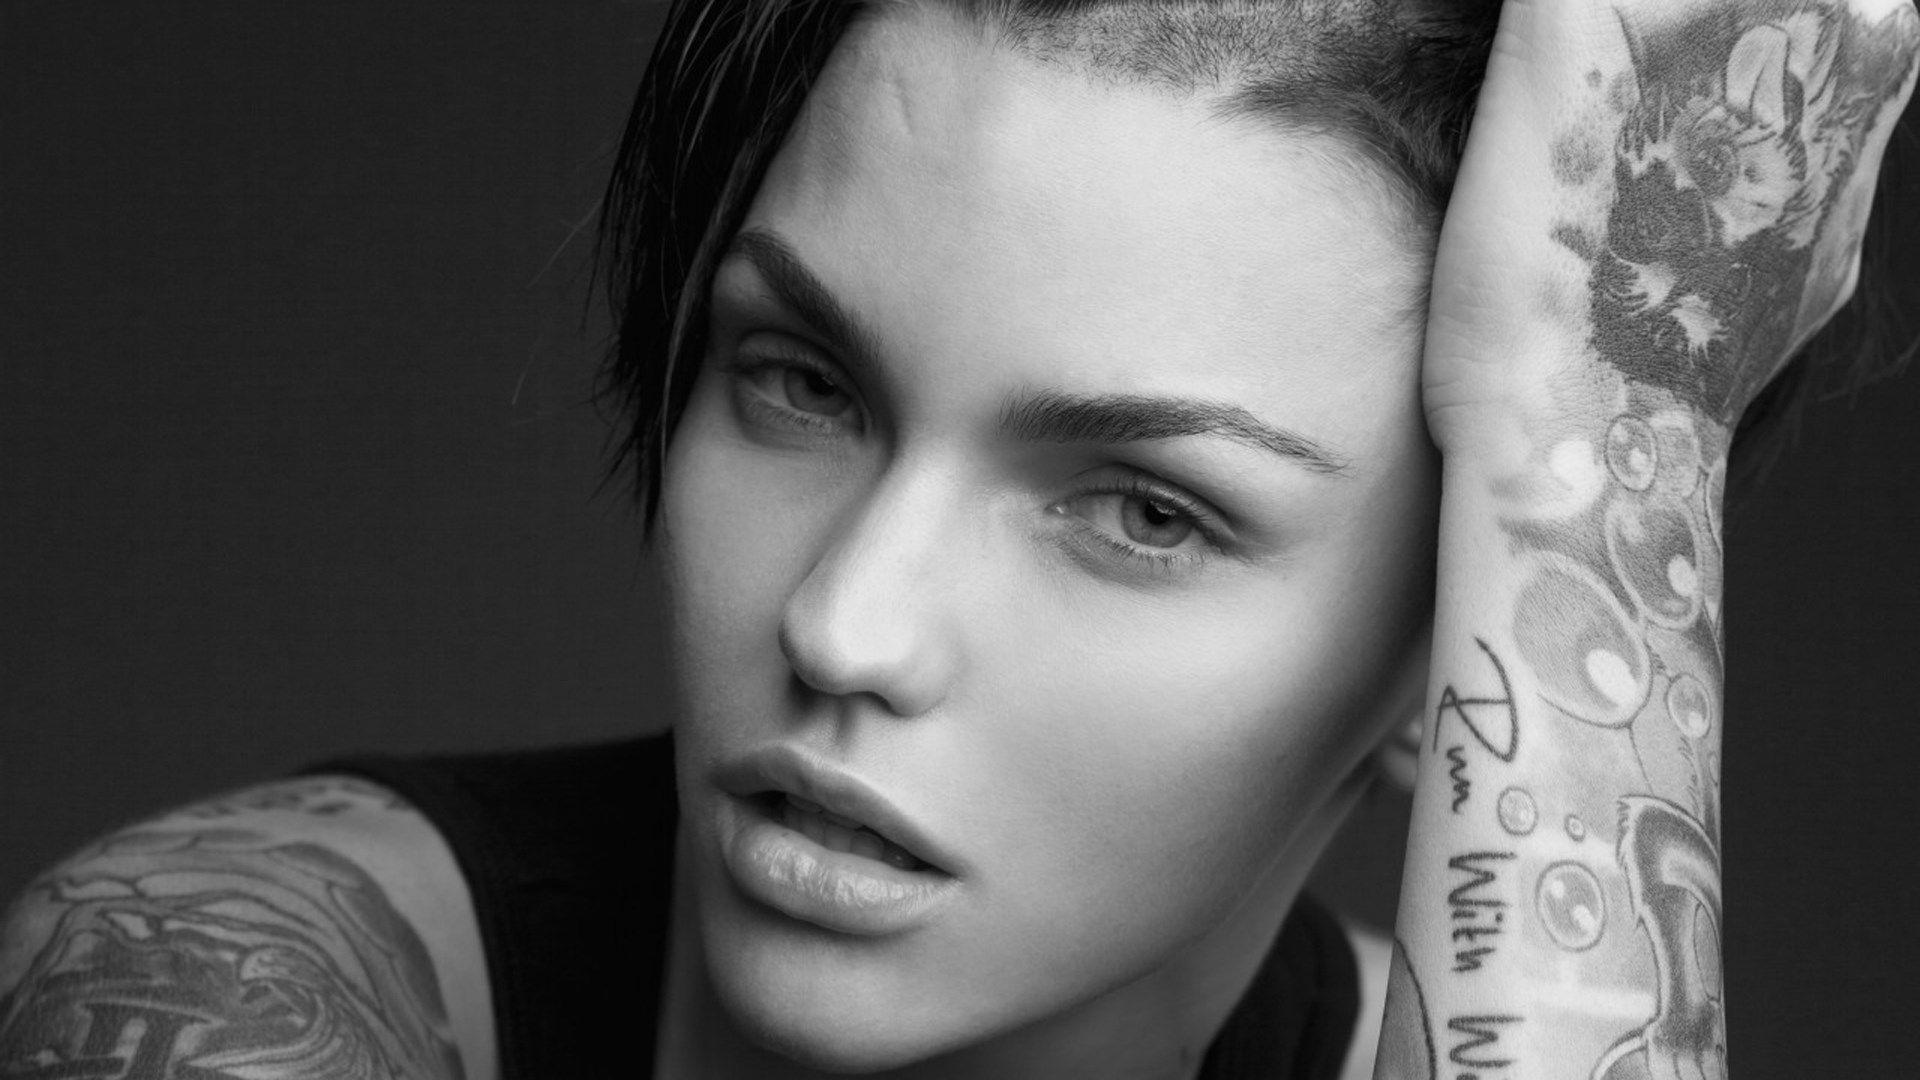 Ruby Rose 2019 Wallpapers Wallpaper Cave Images, Photos, Reviews